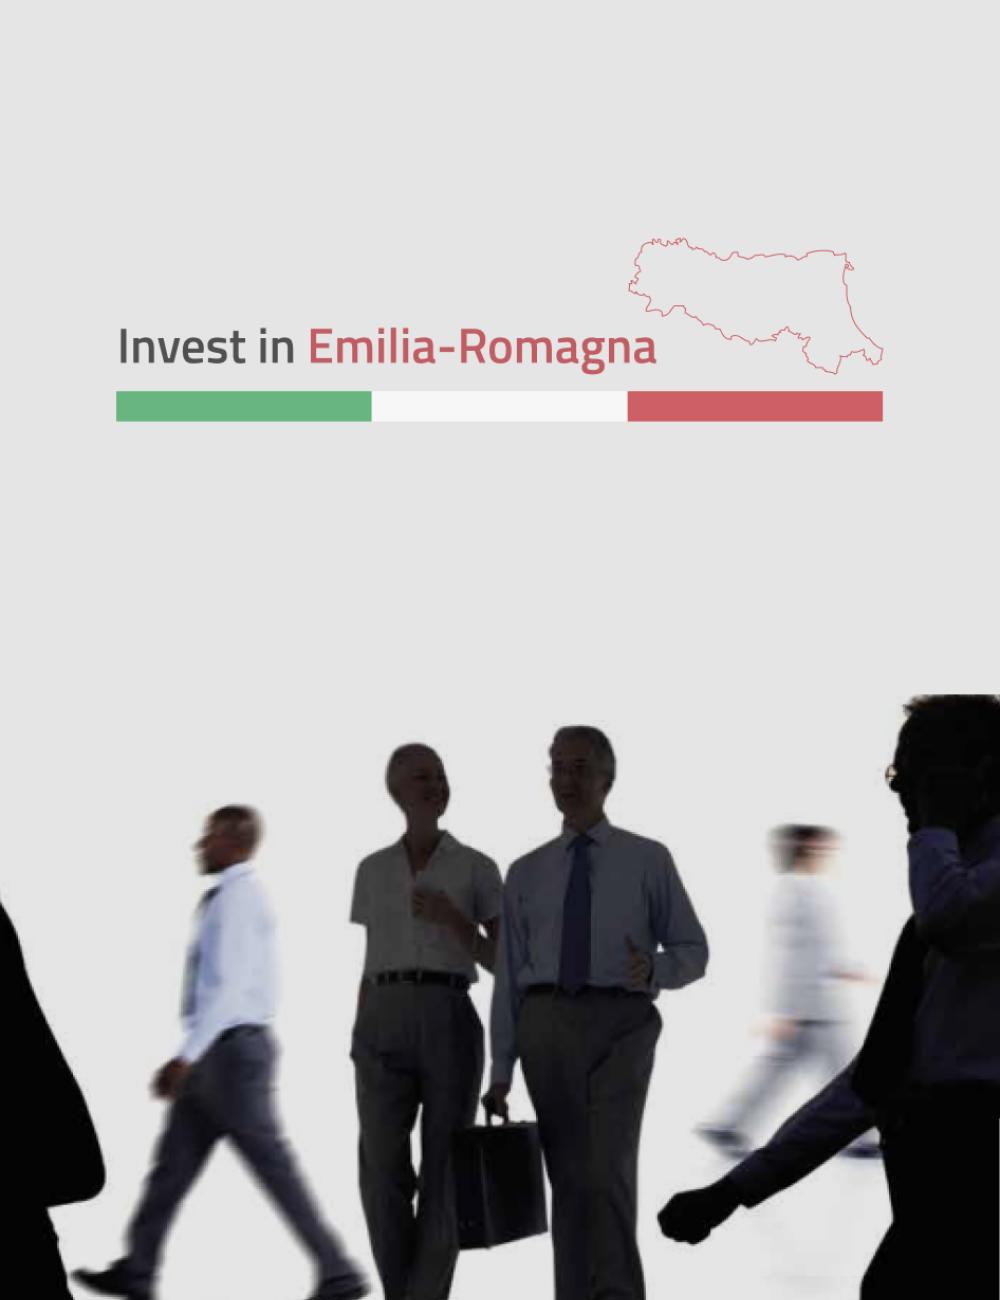 Logo Invest in Emilia-Romagna and people doing business